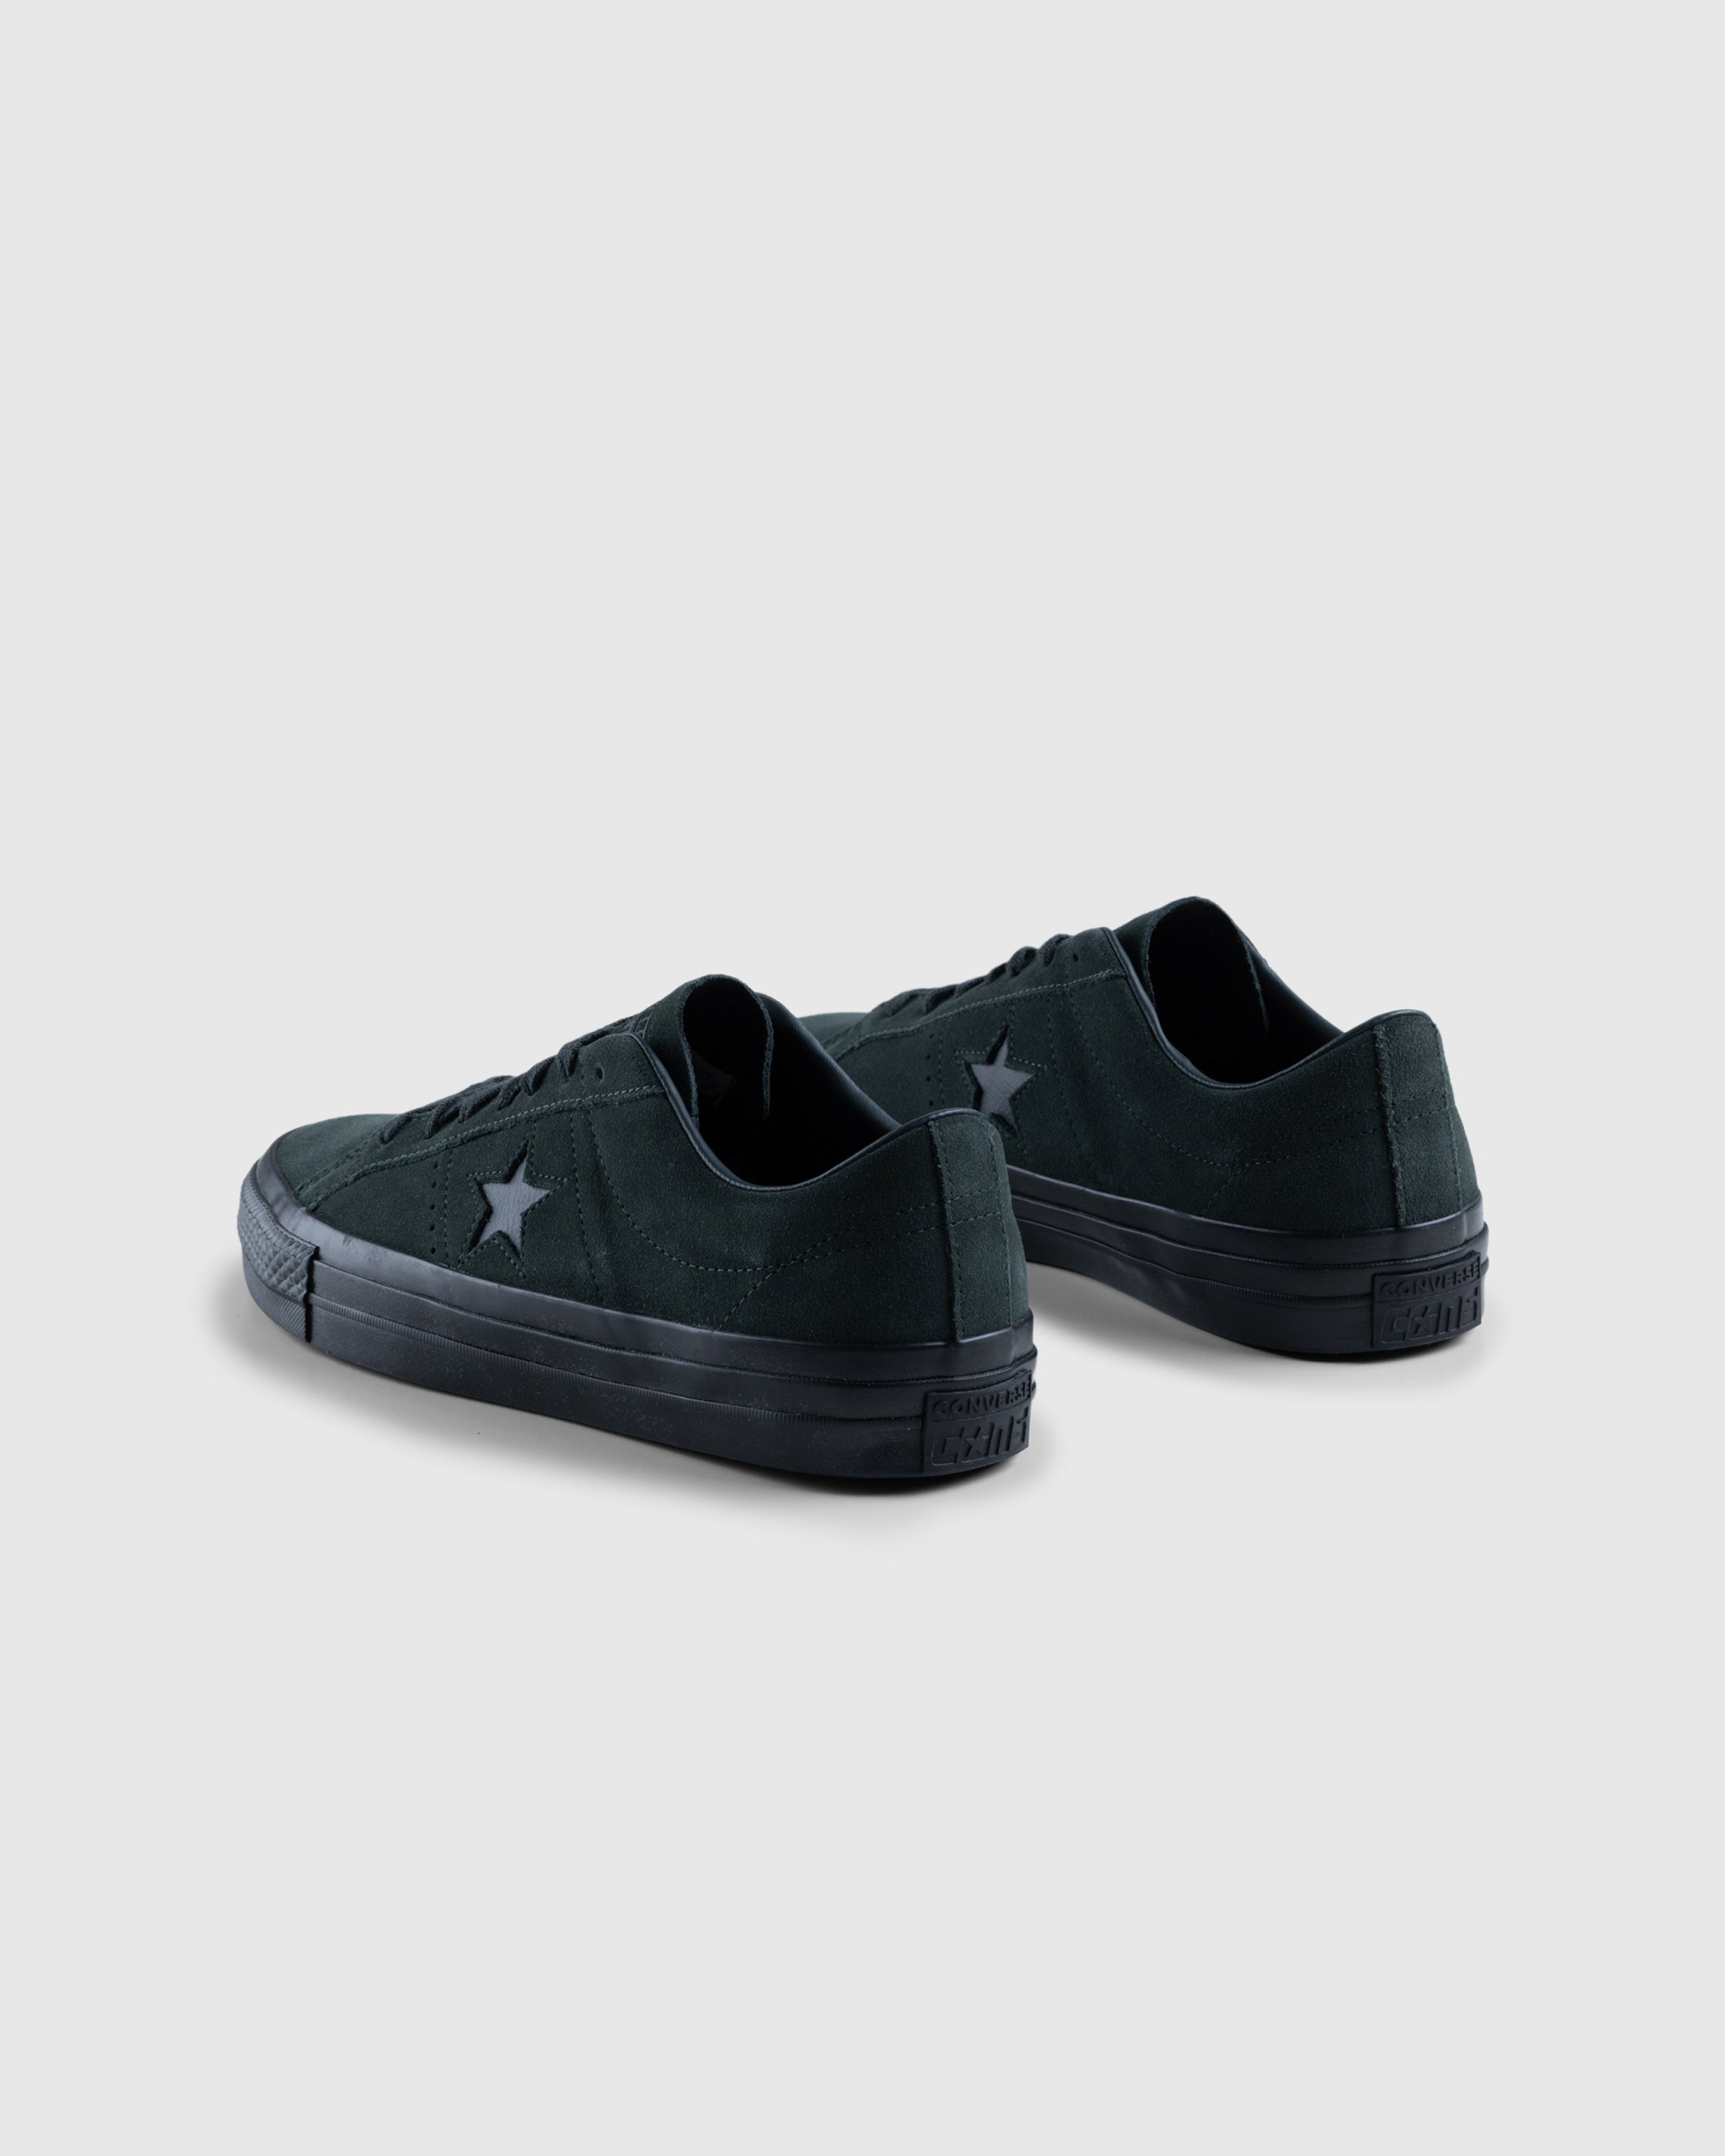 Converse - ONE STAR PRO OX SECRET PINES/BLACK/BLACK - Low Top Sneakers - undefined - Image 3